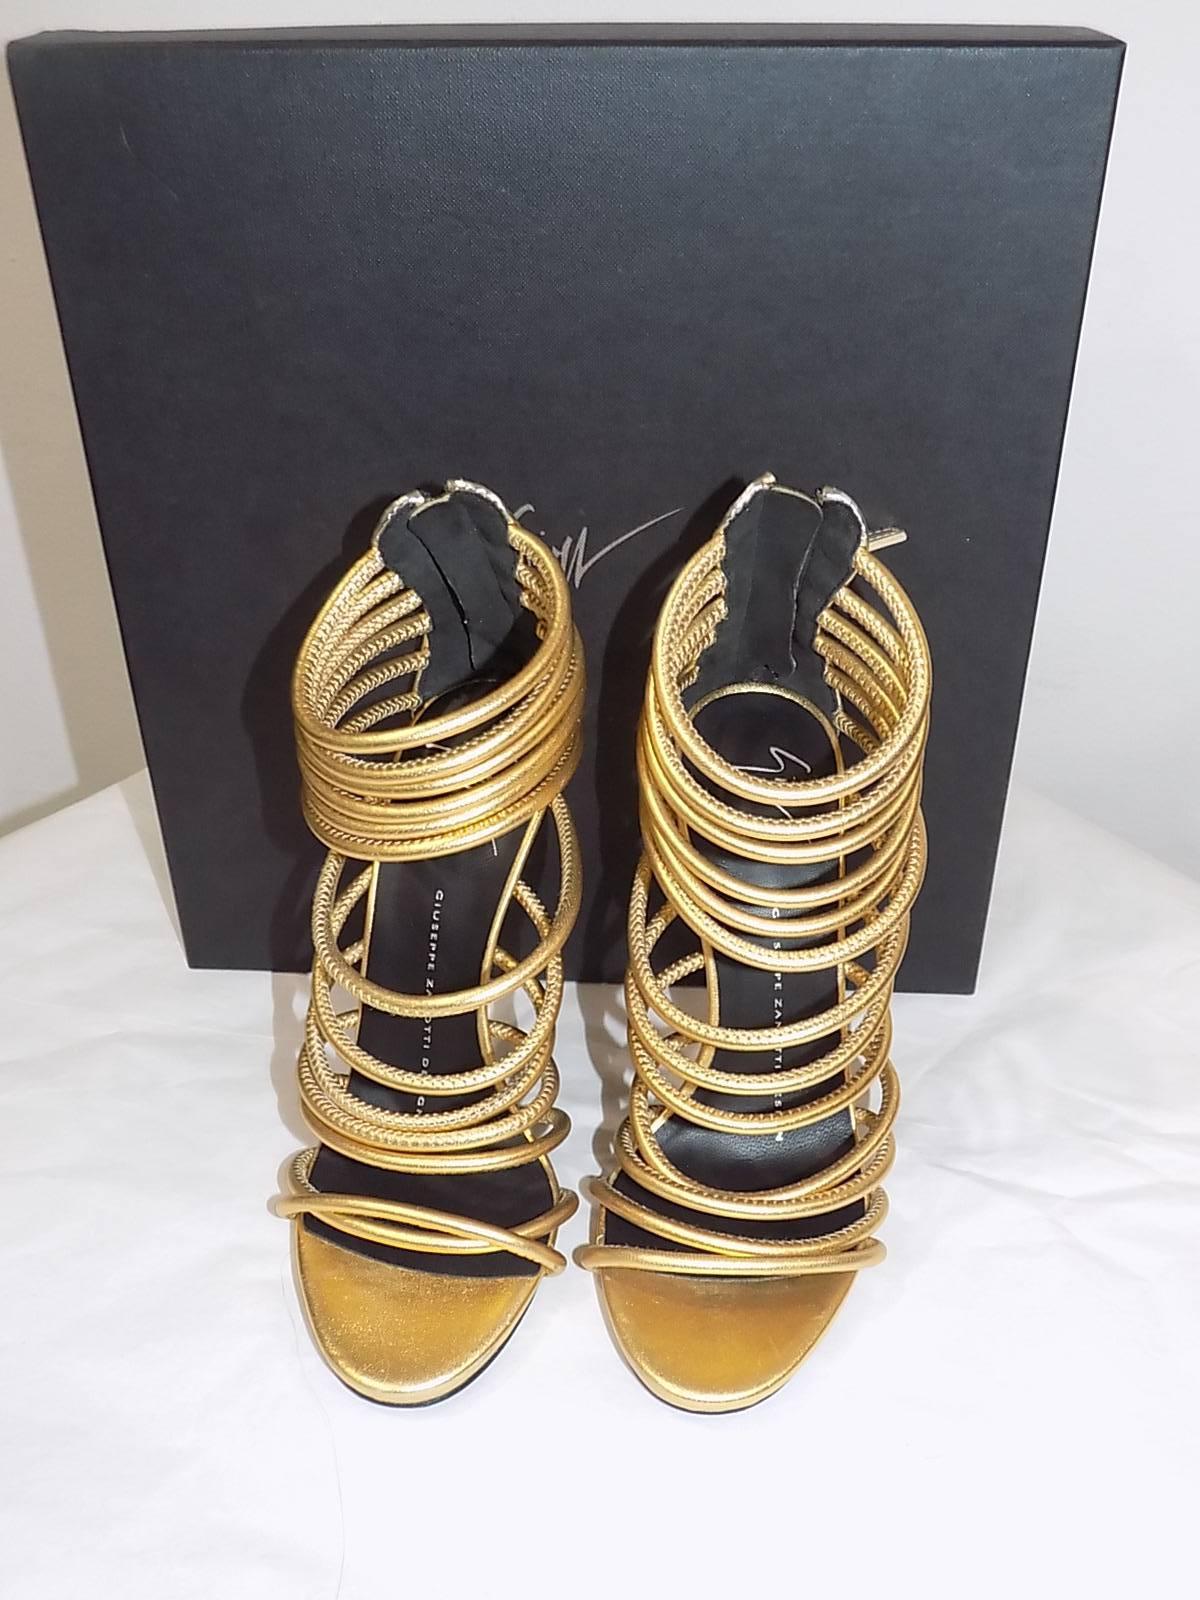  New in box Giuseppe Zanotti Metallic Gold Strappy  Bangle Sandal , Gold  with silver detail at the back and zipper. Size 5